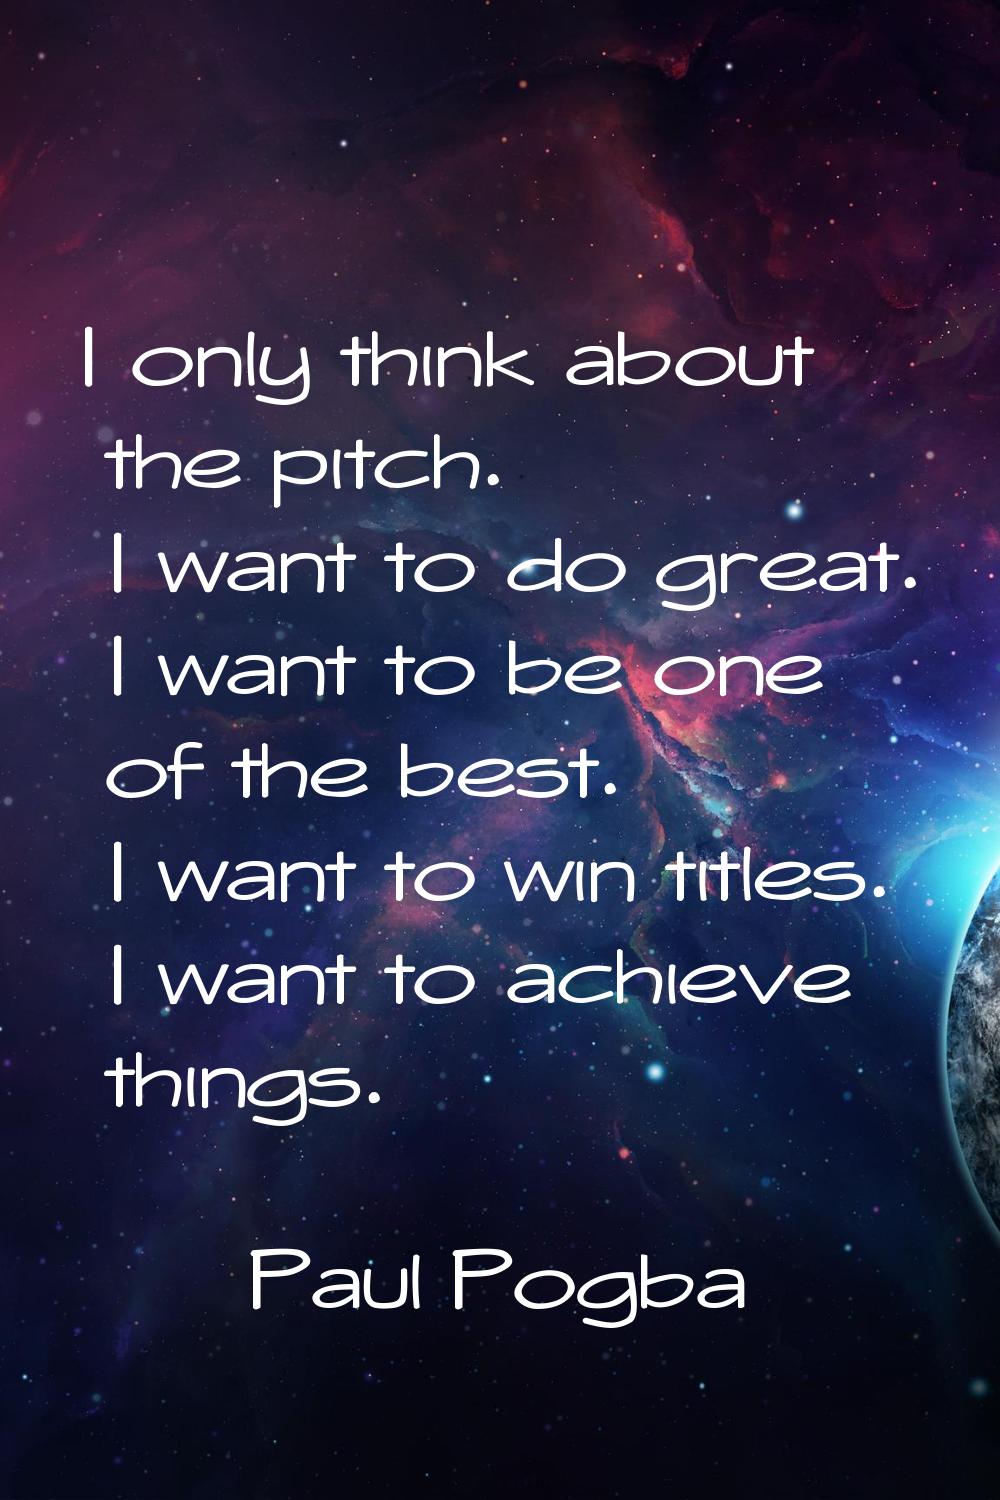 I only think about the pitch. I want to do great. I want to be one of the best. I want to win title